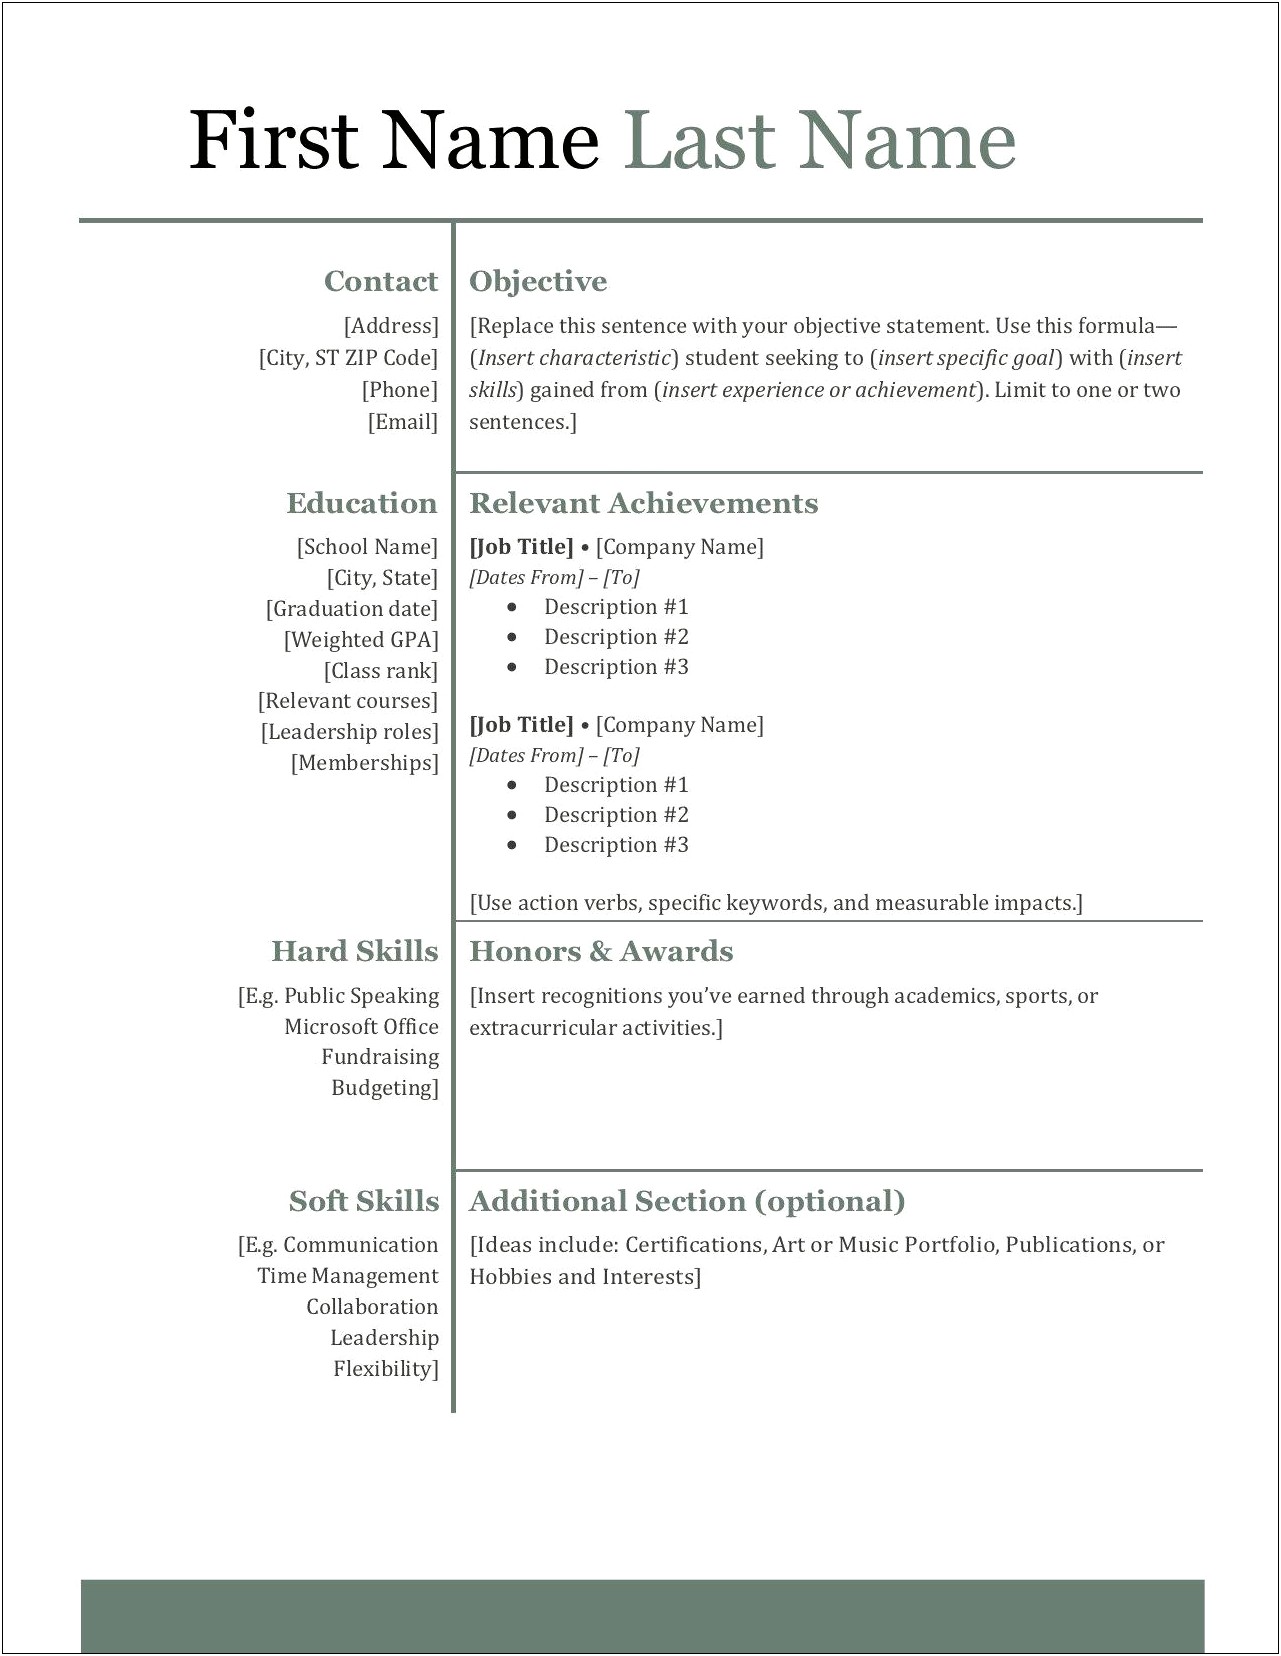 Student Resume Objective Examples For College Applications